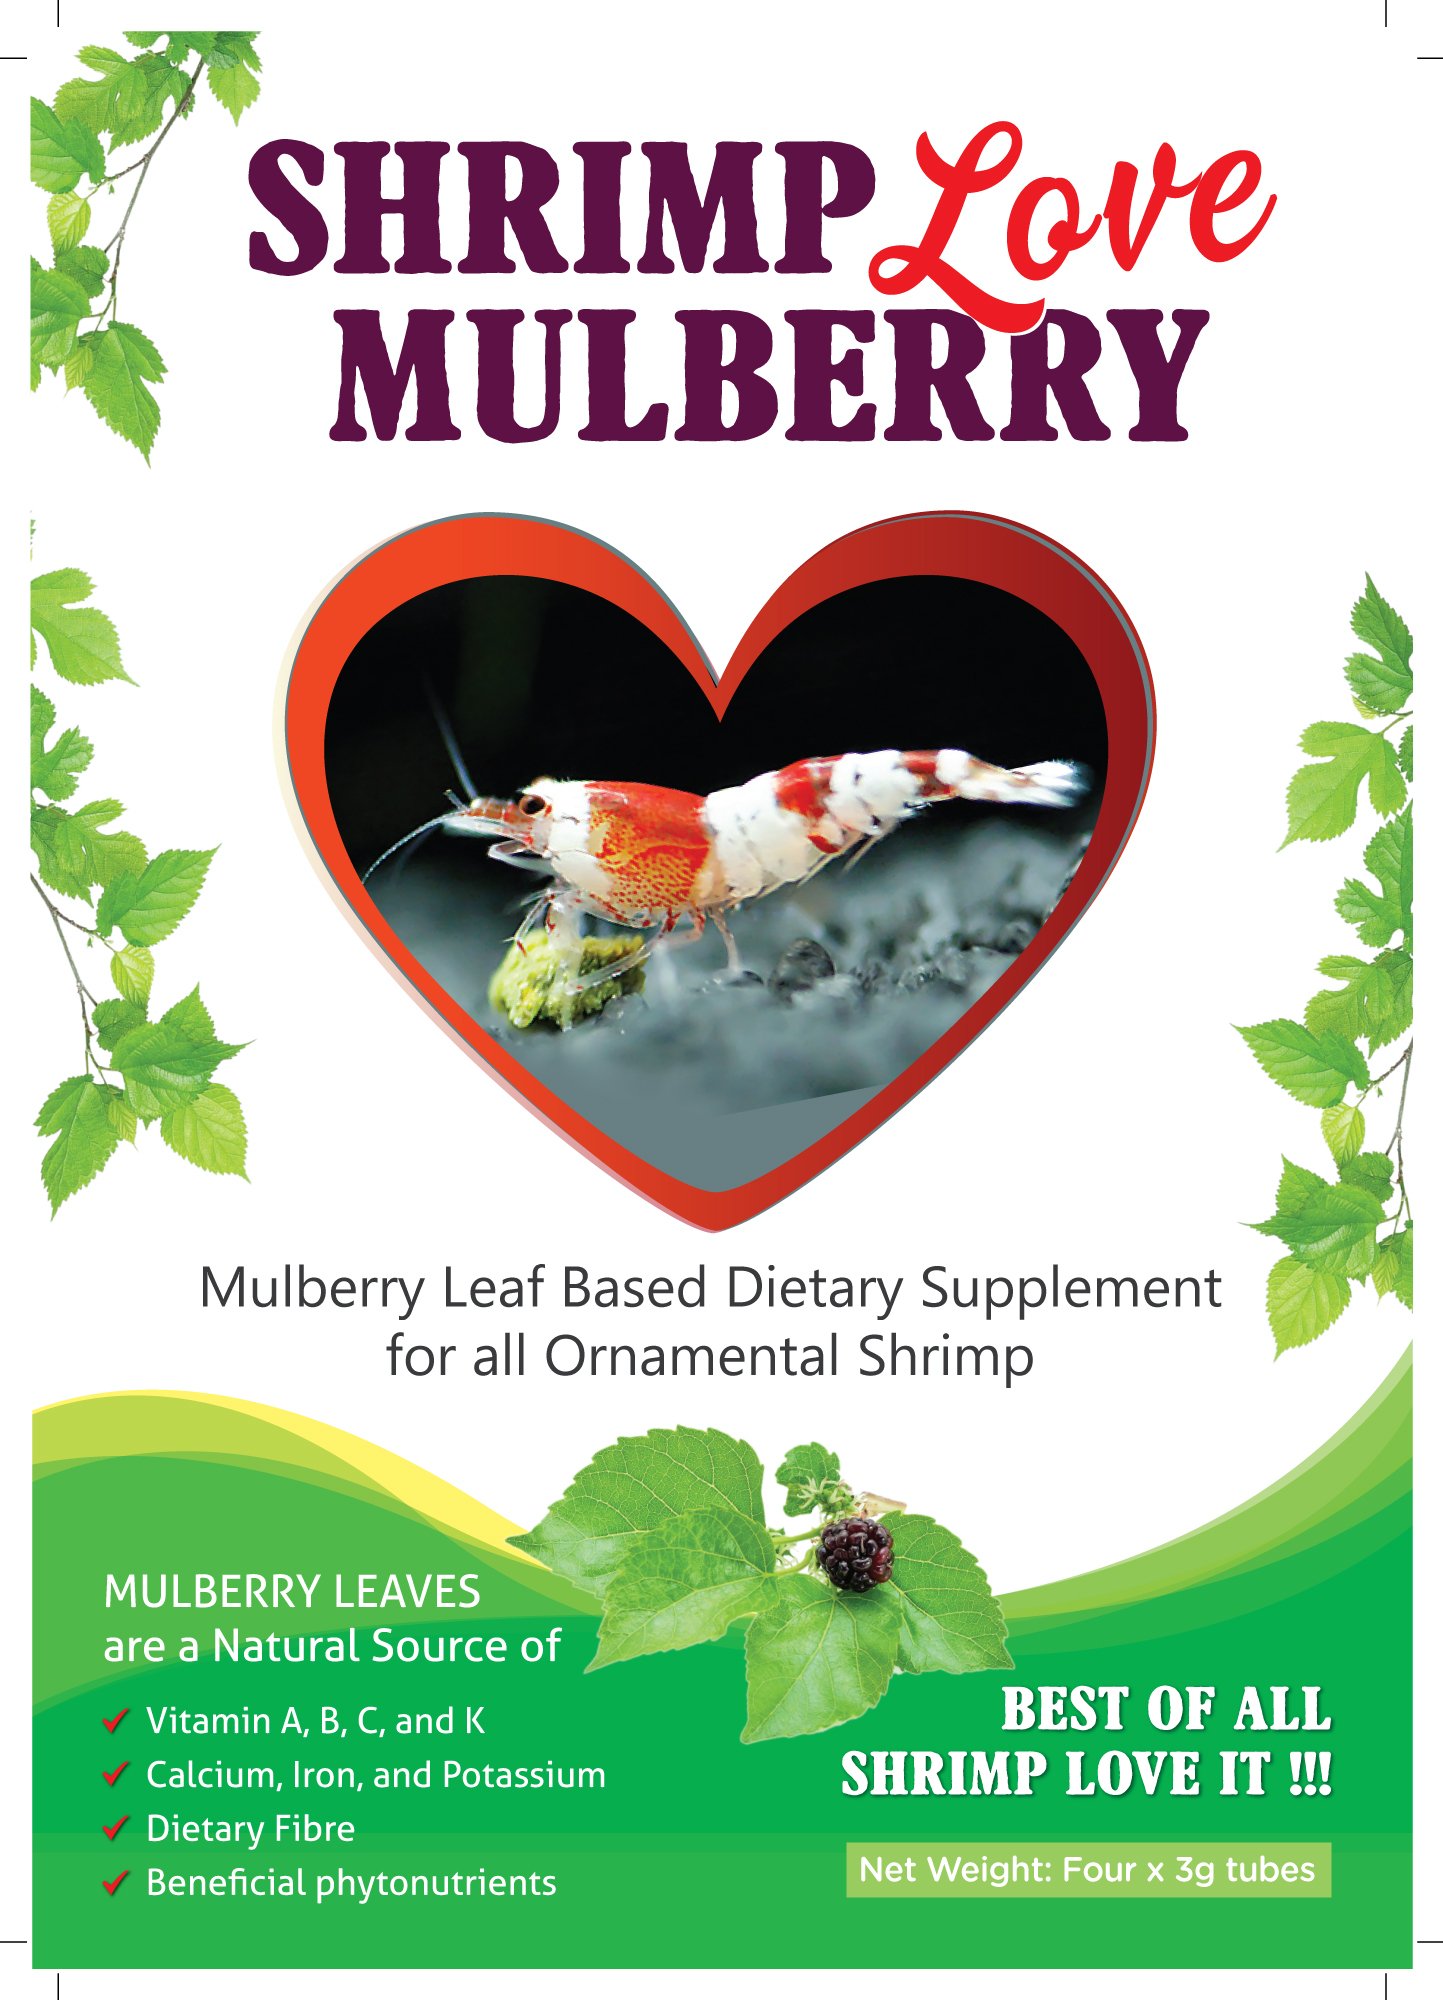 More information about "Shrimp Love Mulberry"